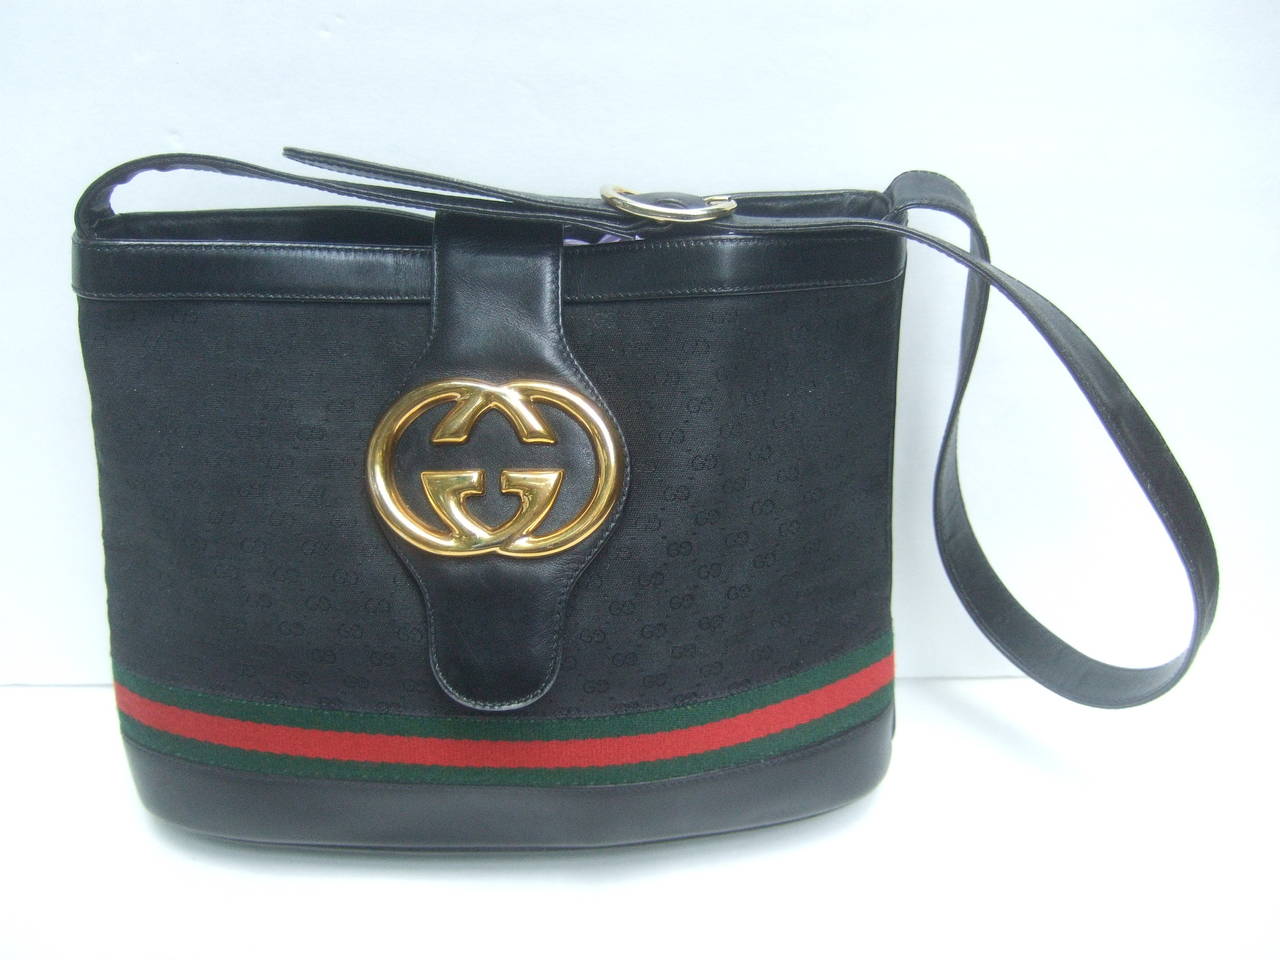 Gucci Black leather and canvas shoulder bag c 1980
The Italian handbag is adorned with Gucci's 
massive gilt metal interlocked initials 

The exterior covering is black canvas with 
Gucci's subtle initials accented with their
signature red and